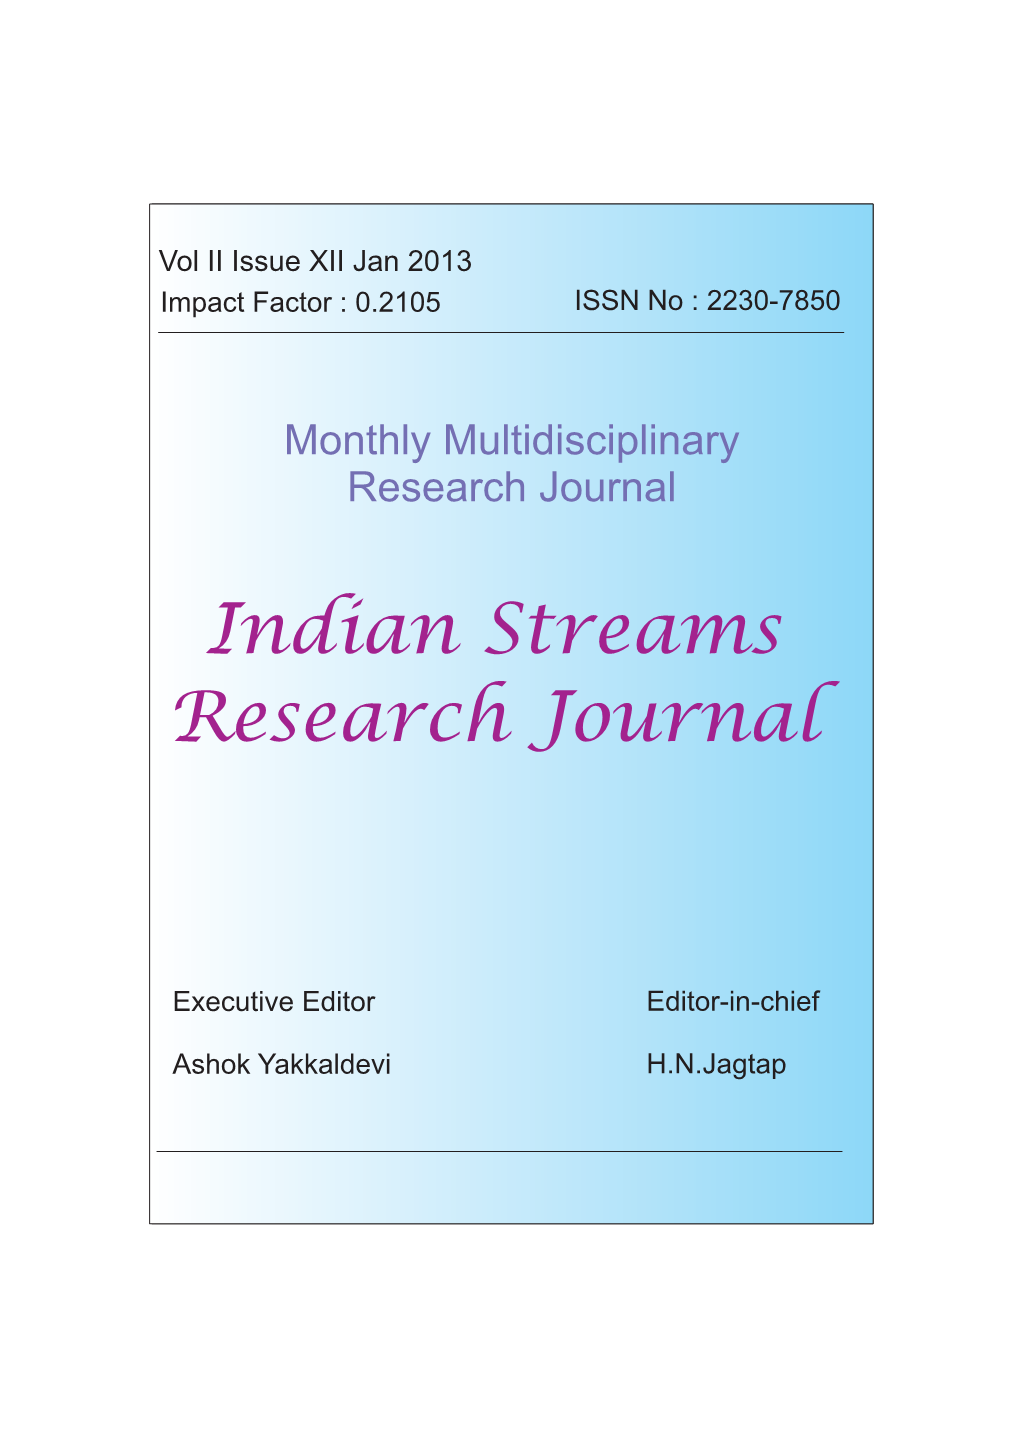 Vol II Issue XII Jan 2013 Impact Factor : 0.2105 ISSN No : 2230-7850